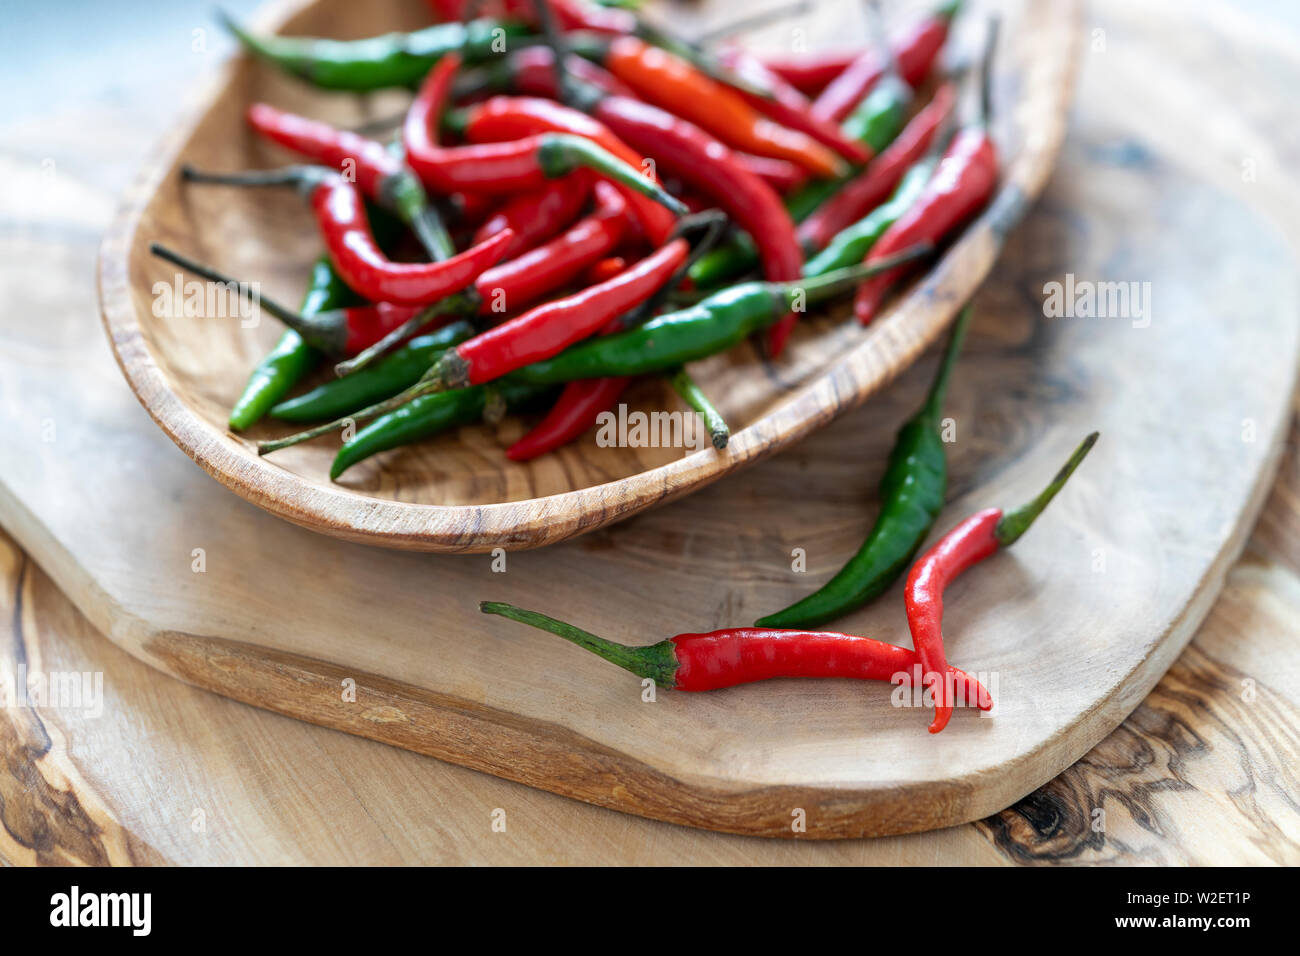 Red and green chilli's in a wooden bowl Stock Photo